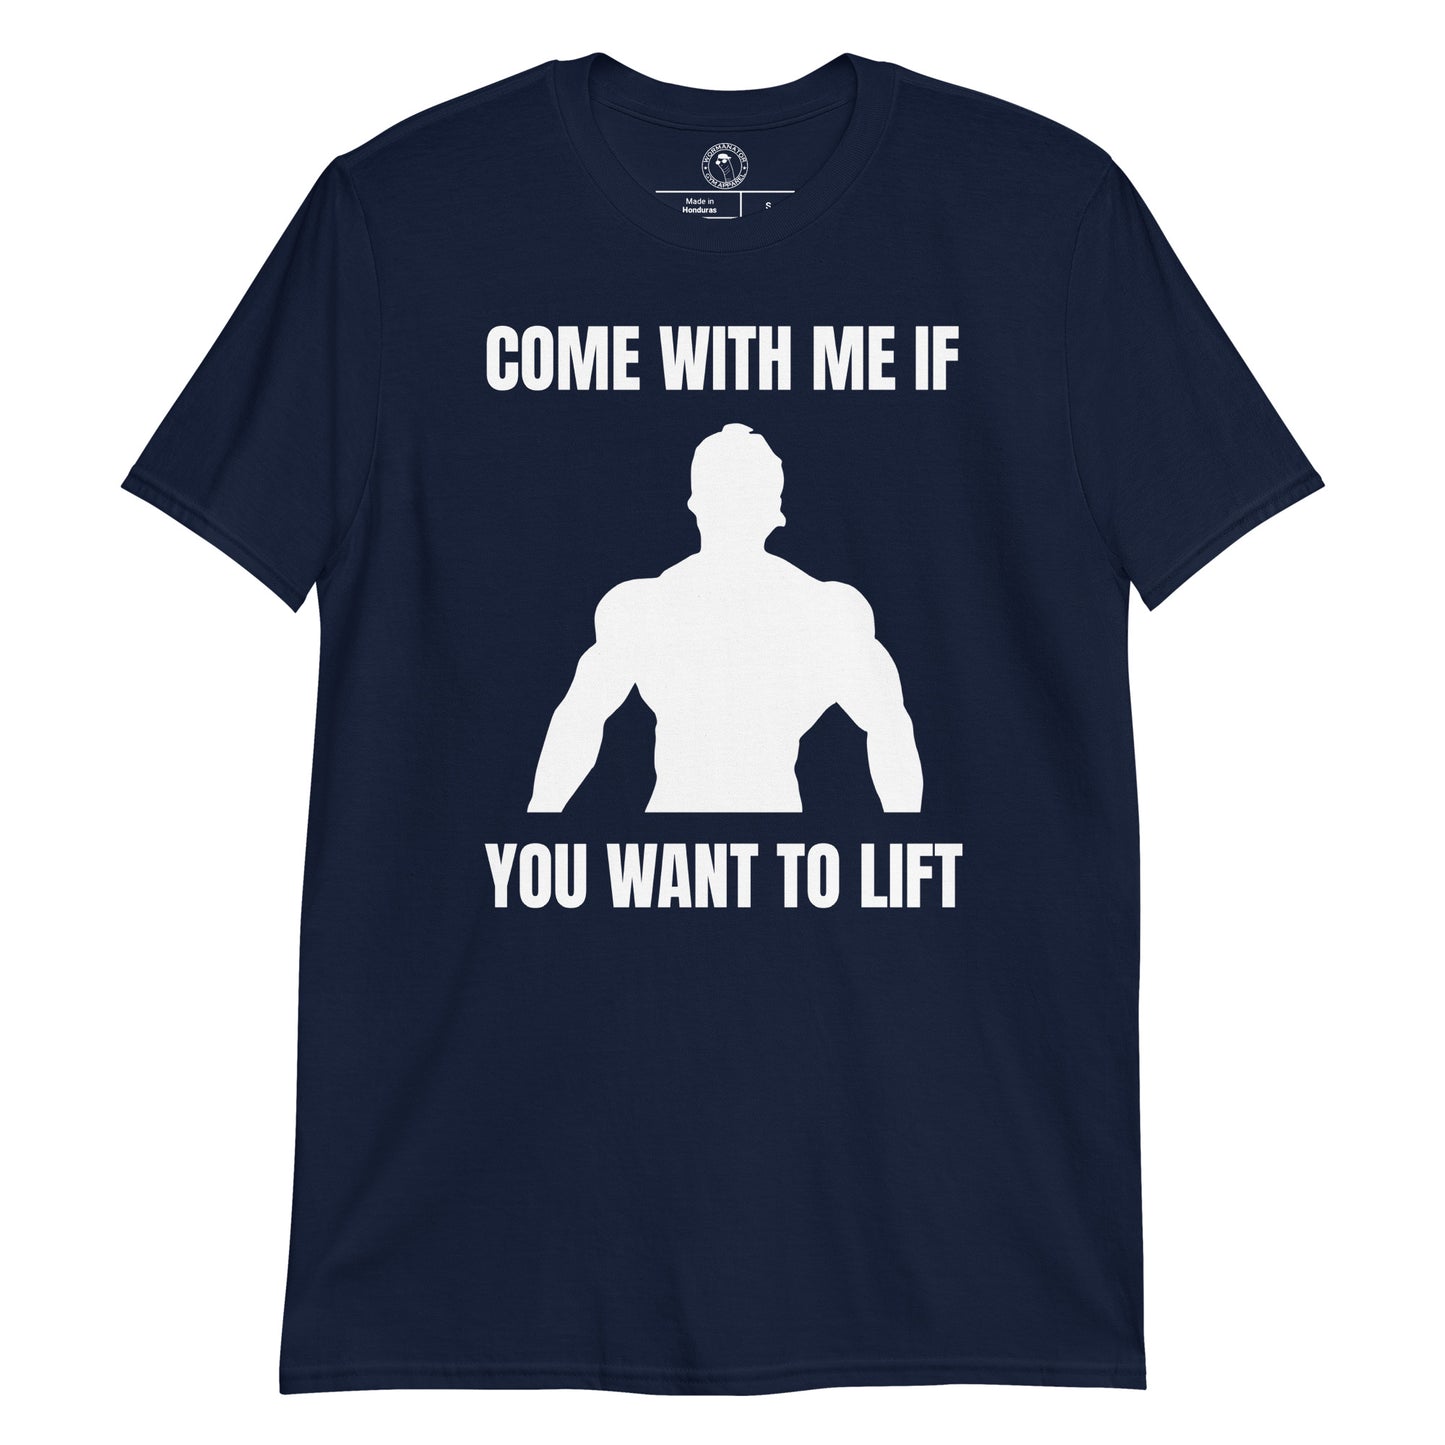 Come with Me if You Want to Lift Shirt in Navy